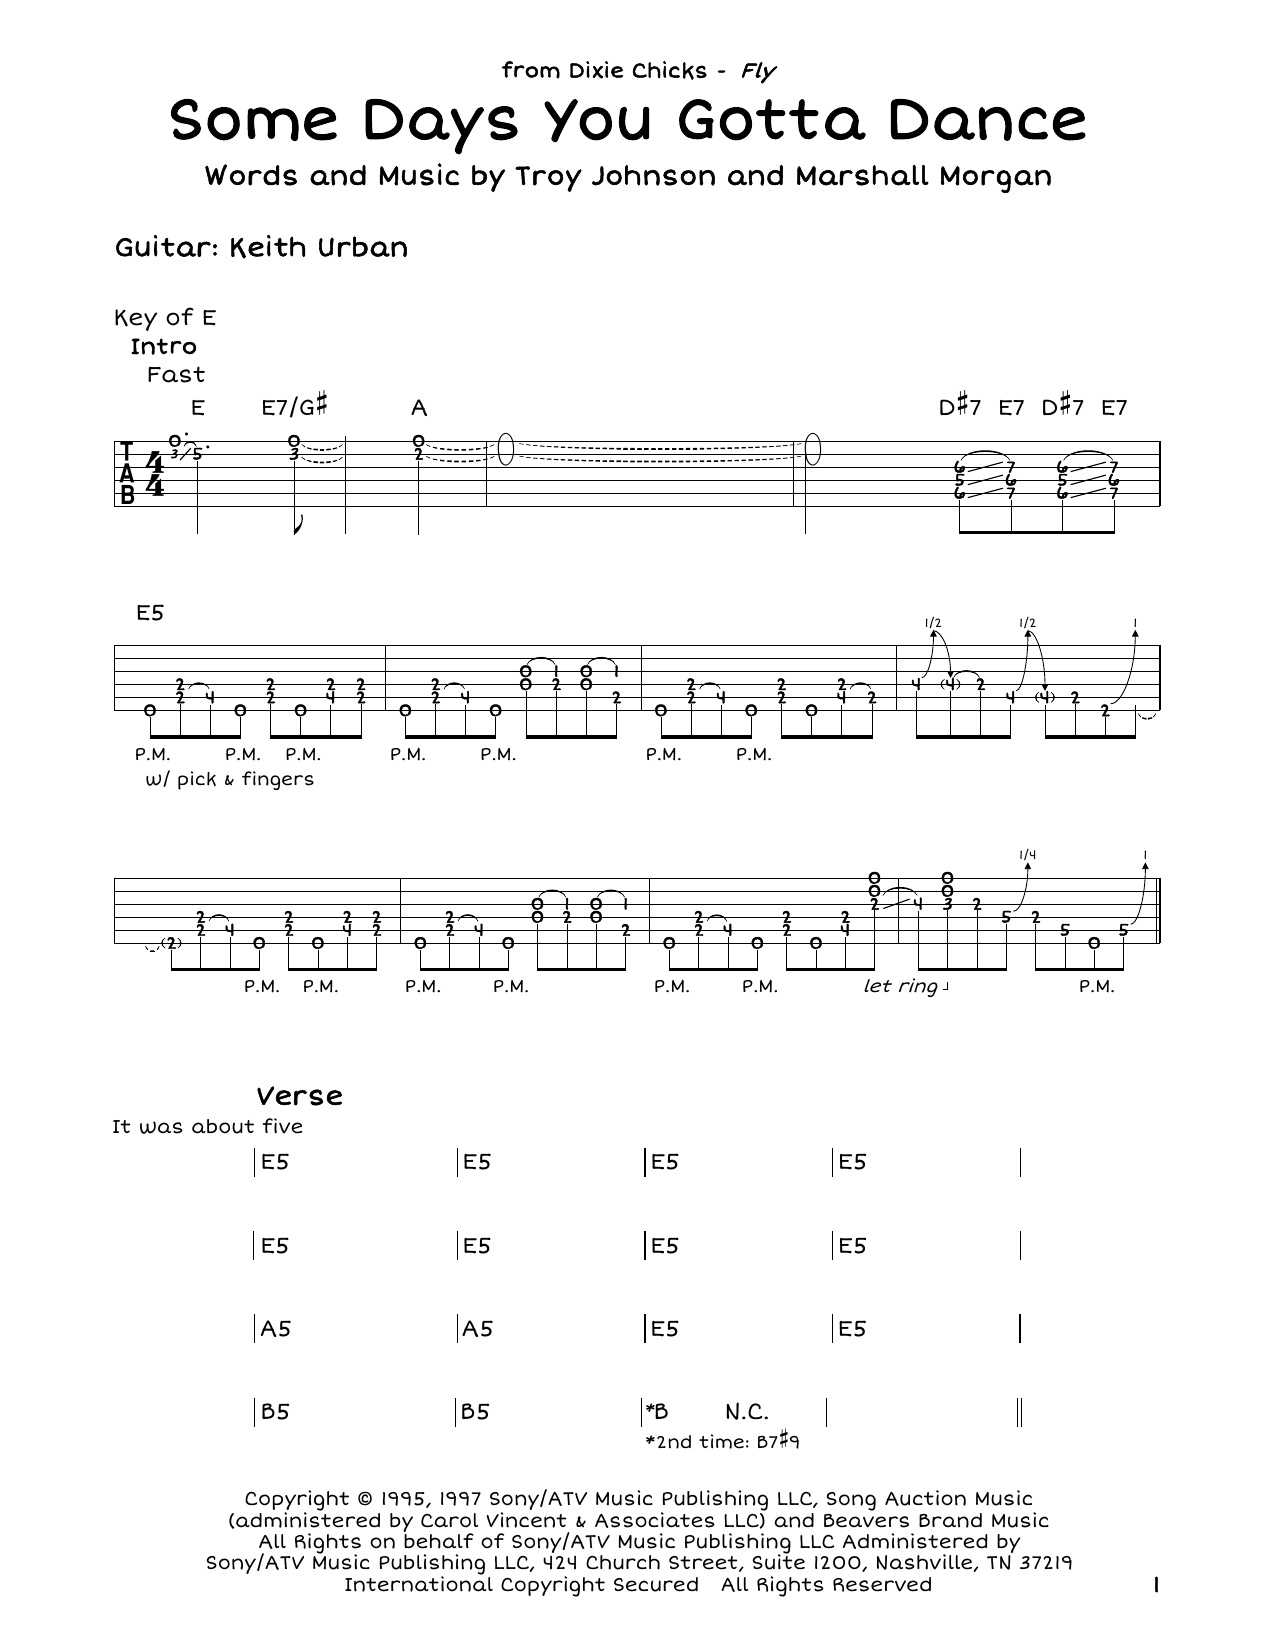 Download Dixie Chicks Some Days You Gotta Dance Sheet Music